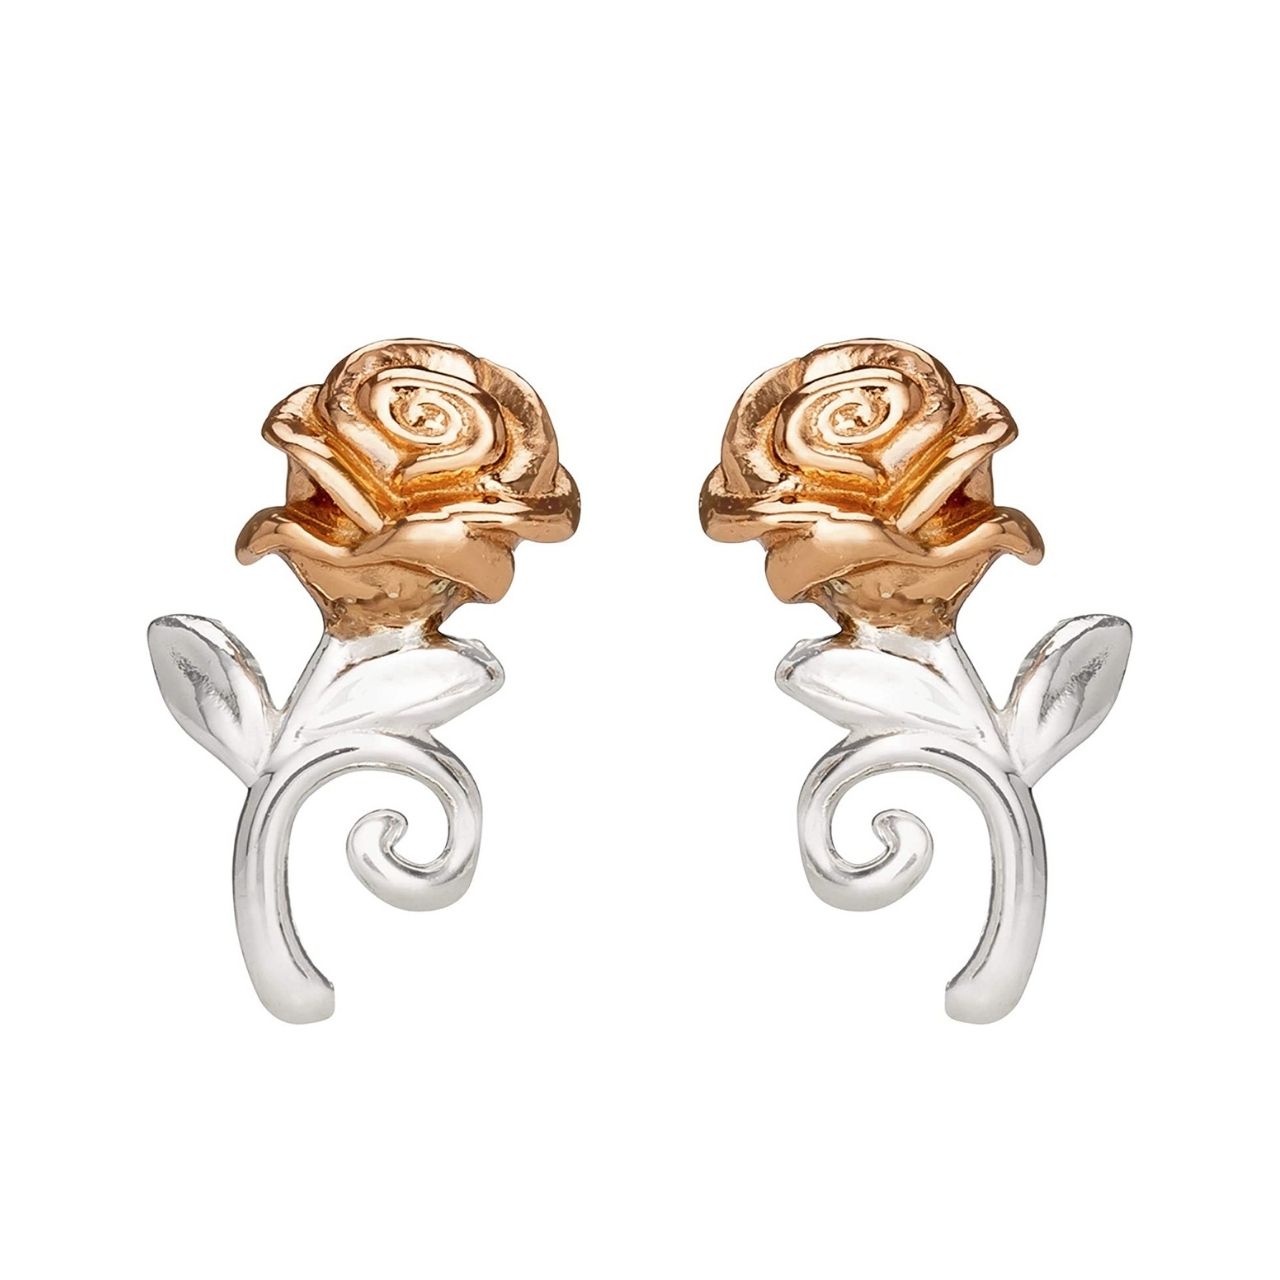 Disney Princess Silver and Rose Gold Earrings  Beautiful silver and rose gold Princess rose earrings adding a feminine touch to the Disney classic piece of Jewellery.  Trendy and fashionable design, the Disney Princess collection, sterling silver and rose gold earrings add a chic, fun touch to any outfit.